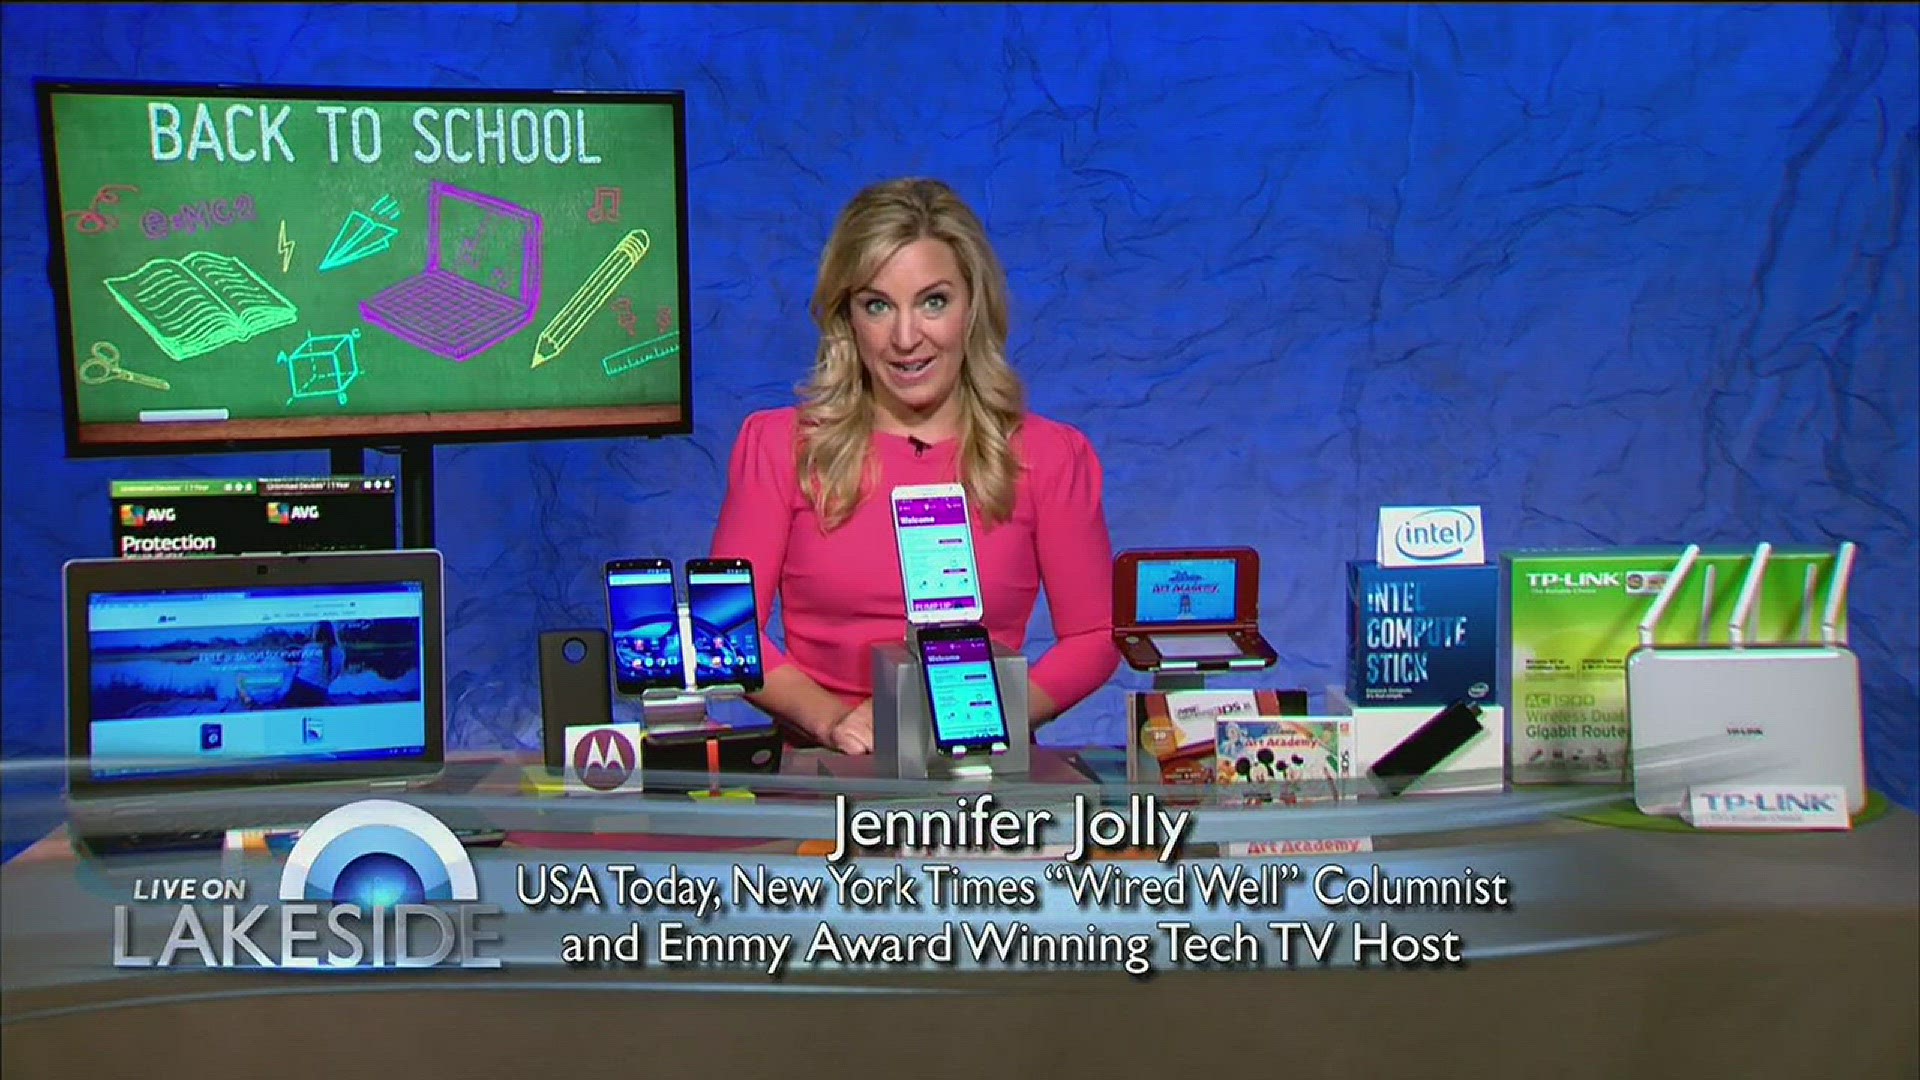 Whether your kids have going back to school or are yet to start, we are emphasizing the "fun" in functional for back to school shopping today with Emmy Award Winner and Consumer Technology Journalist, Jennifer Jolly! Contact Information : www.ThunkNews.com/Wow